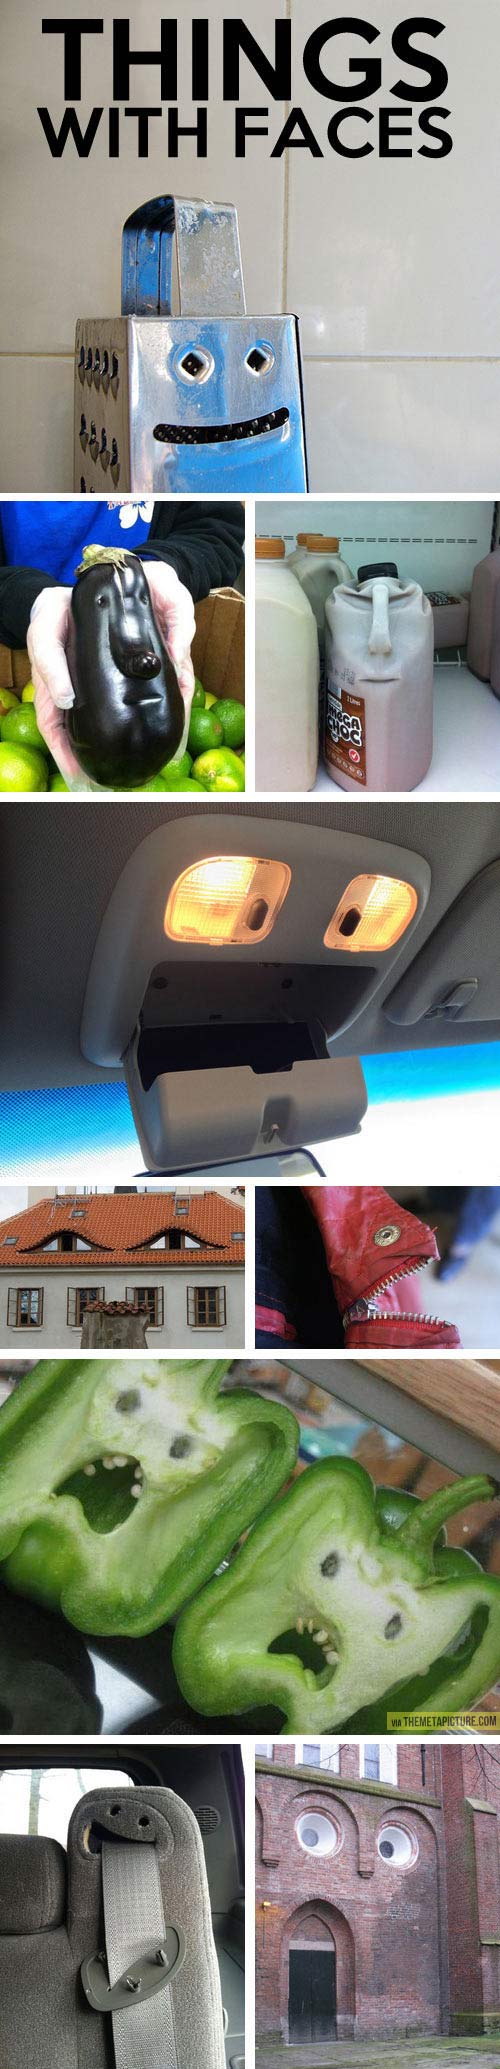 Pareidolia: things with faces...